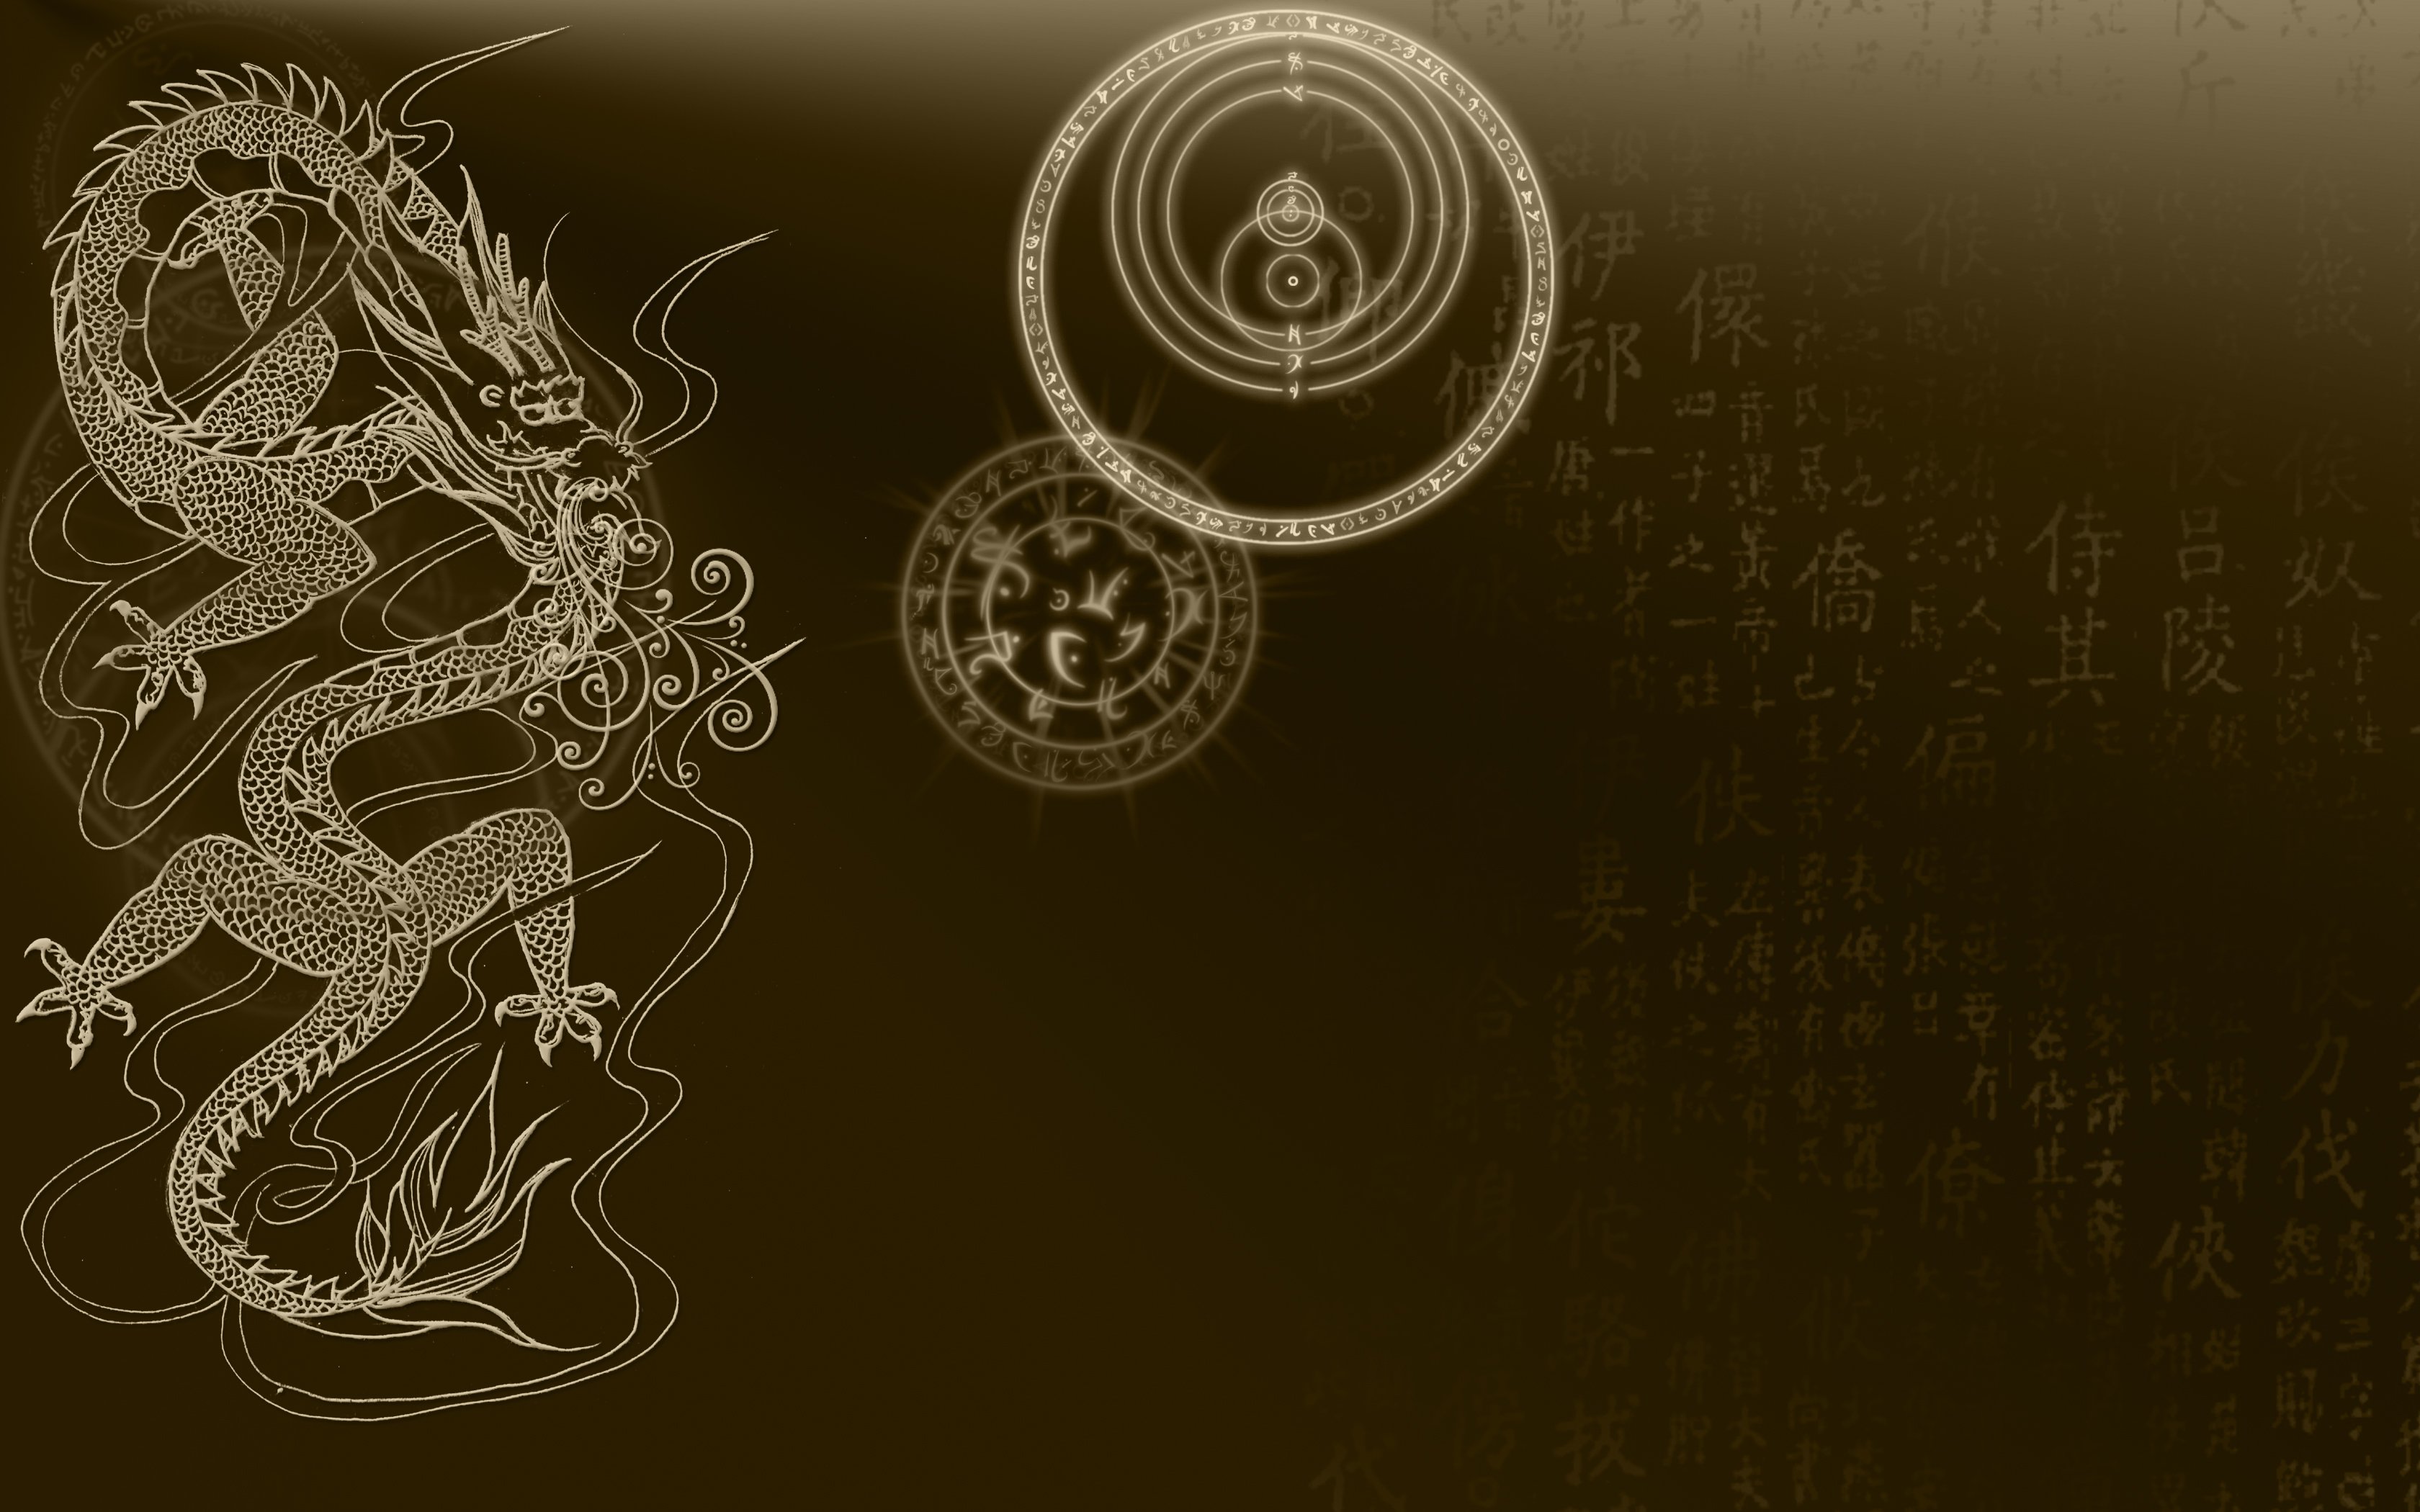 Chinese Dragons wallpapers Chinese Dragons background